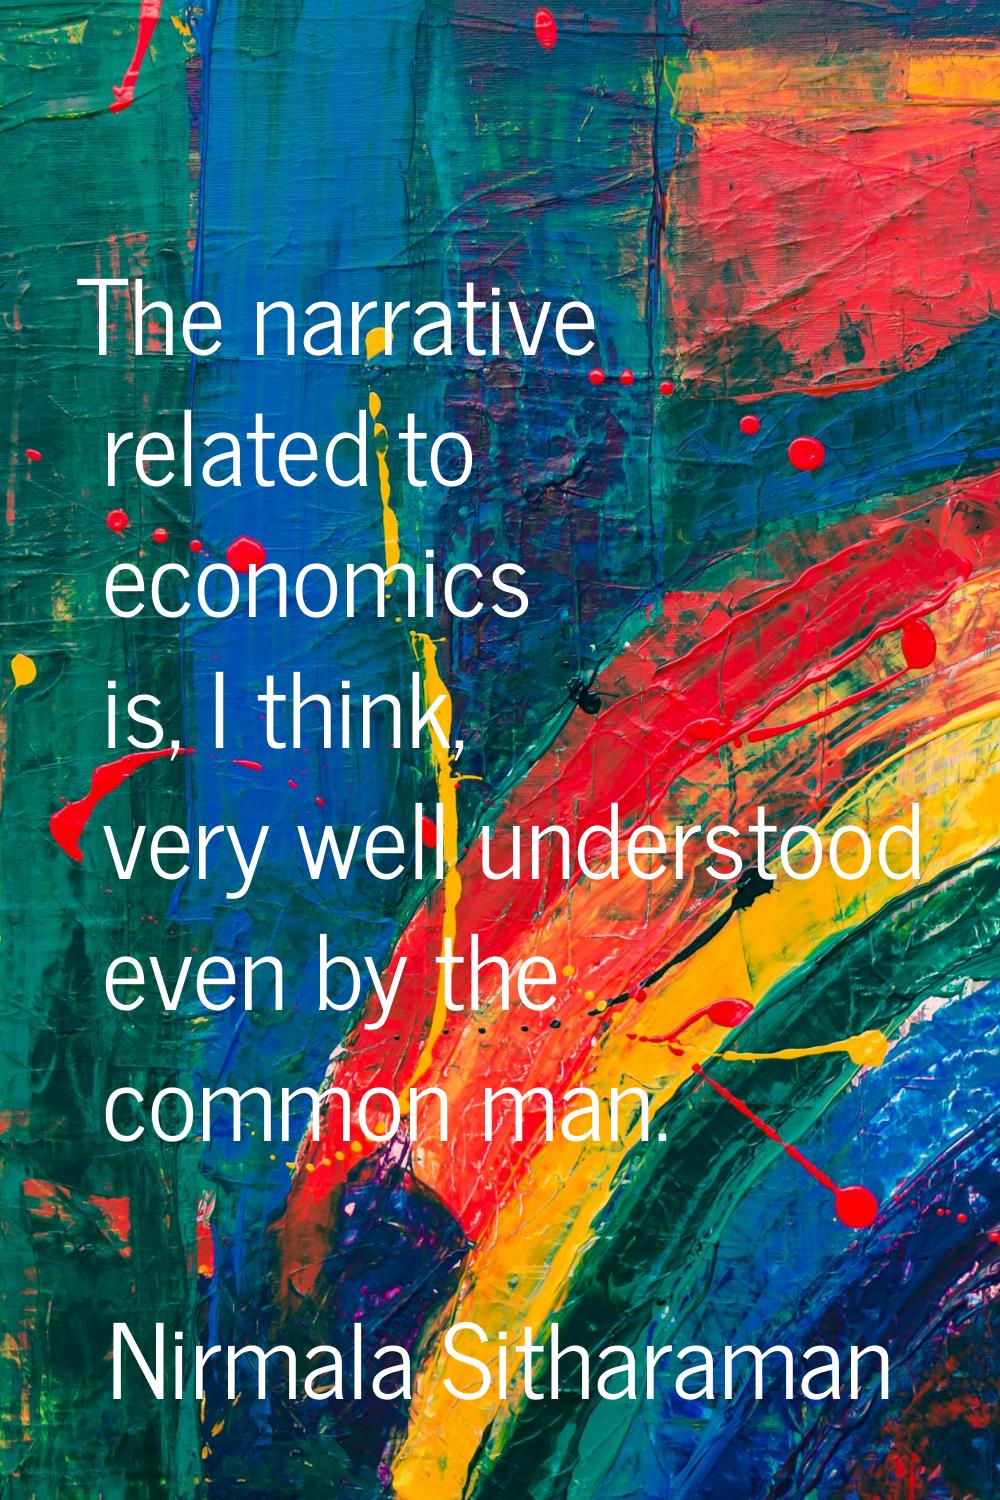 The narrative related to economics is, I think, very well understood even by the common man.